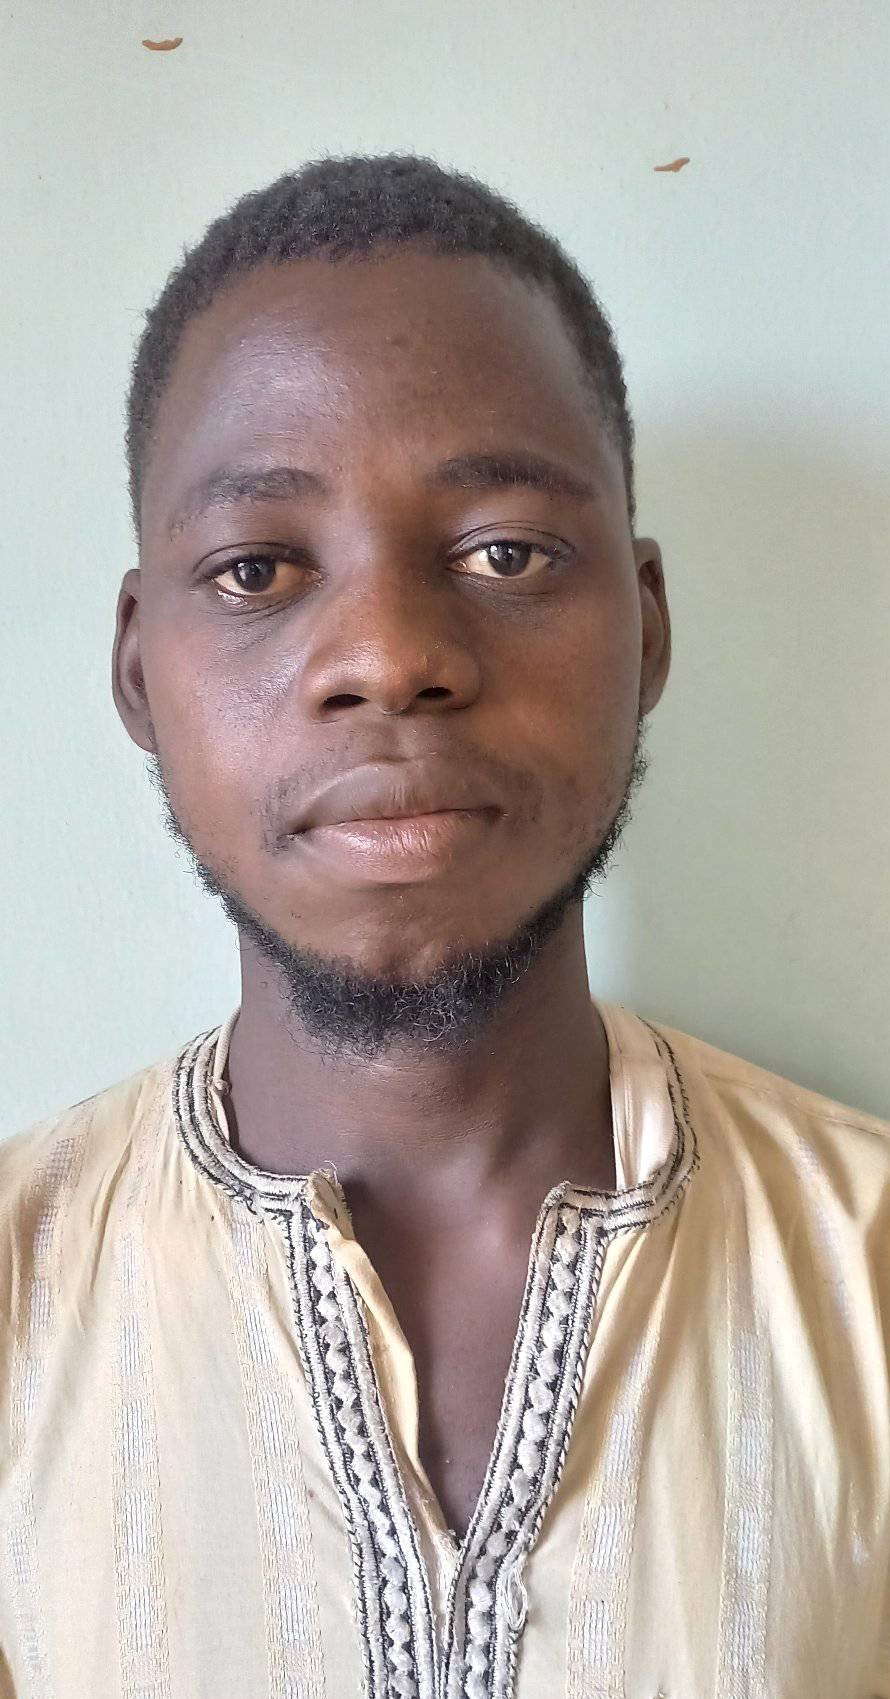 Man arrested for raping his married lover